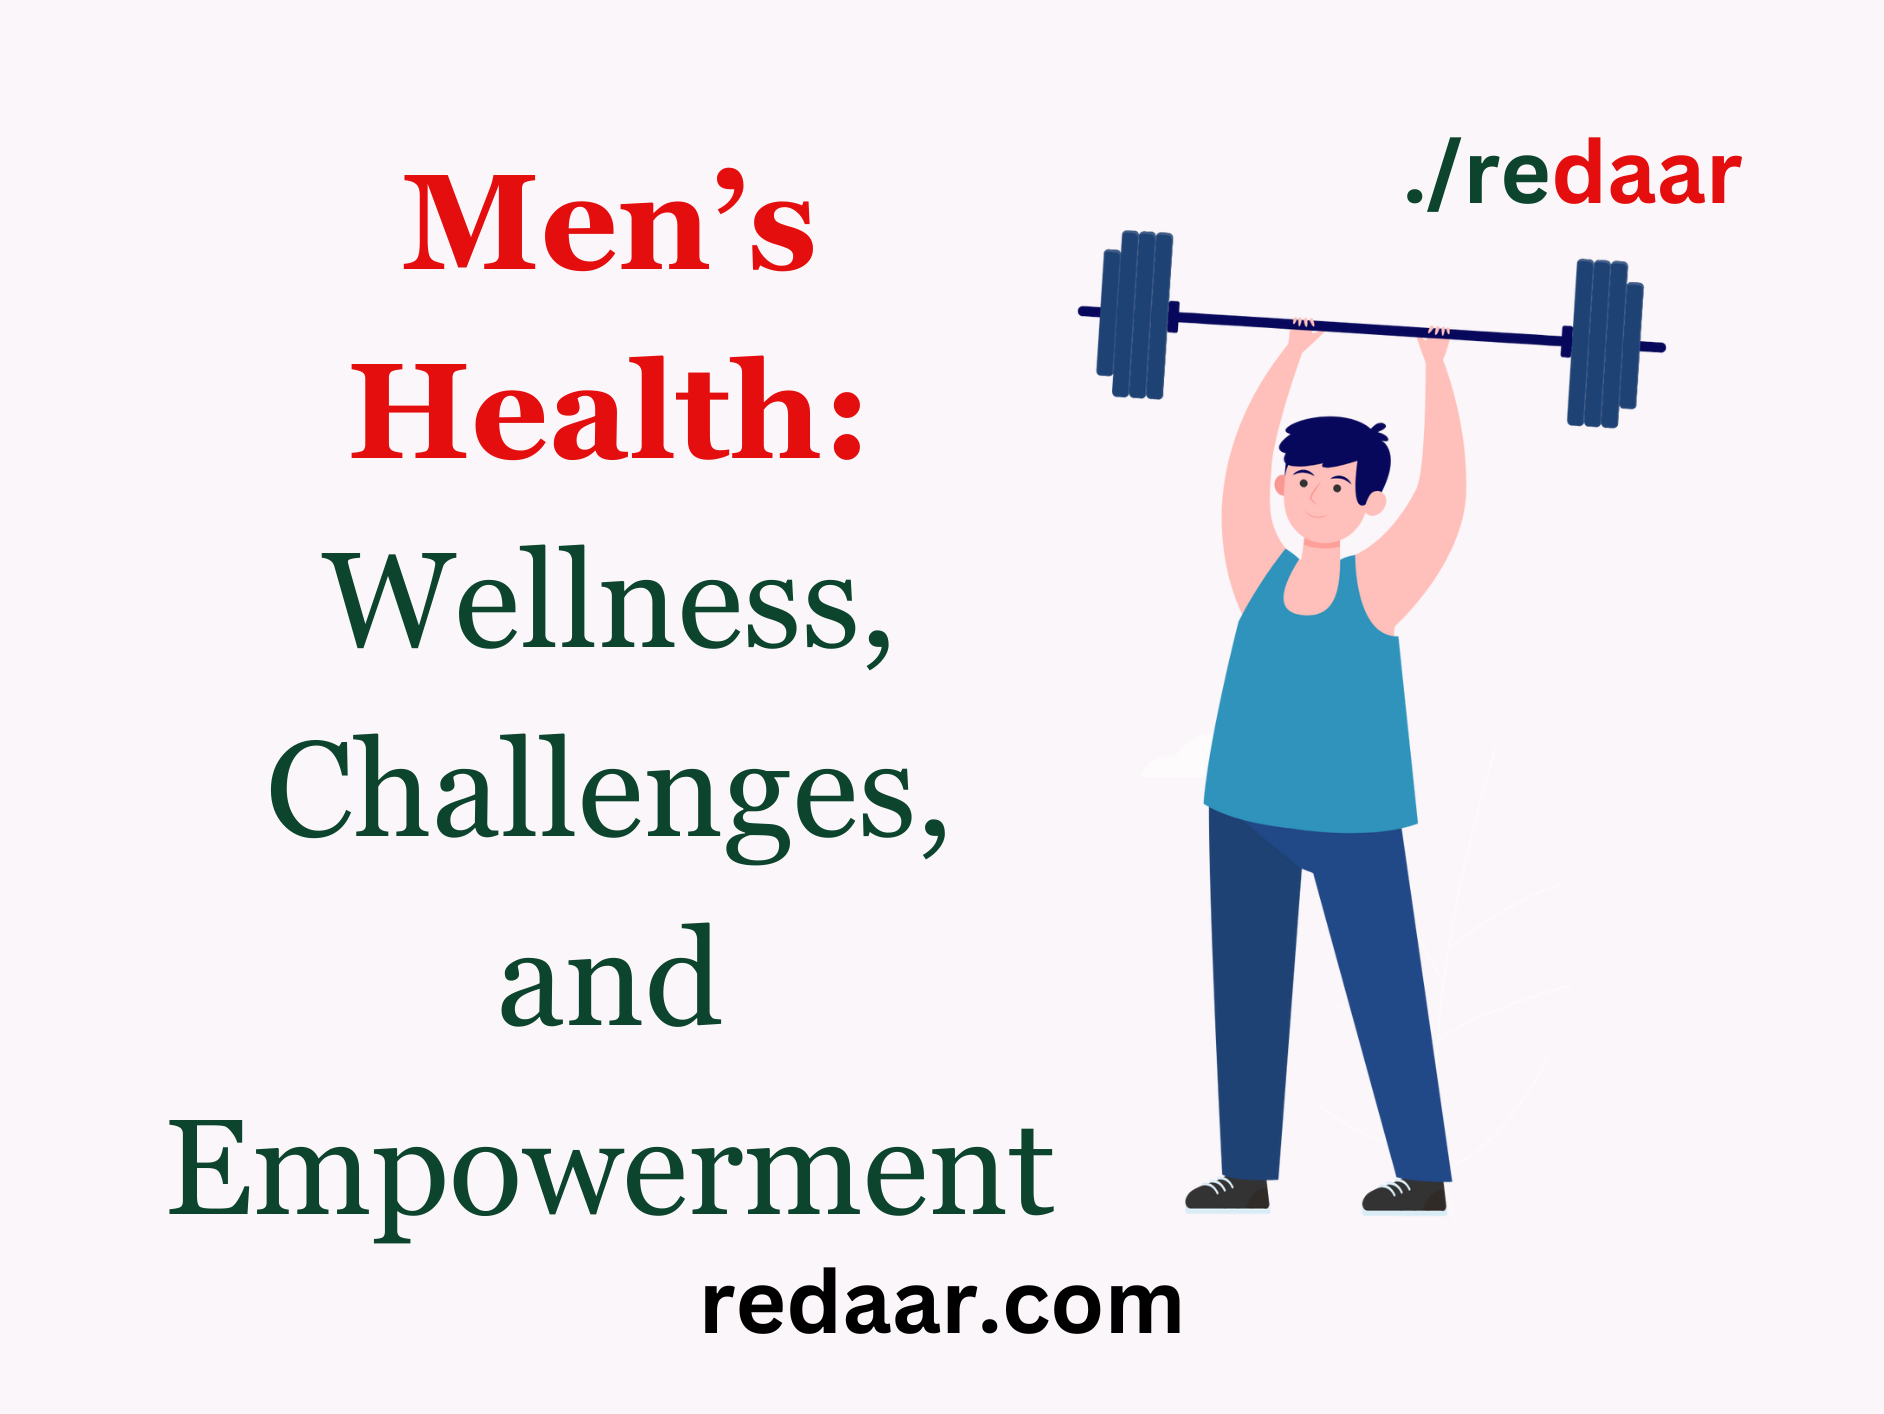 Men’s Health: Wellness, Challenges, and Empowerment